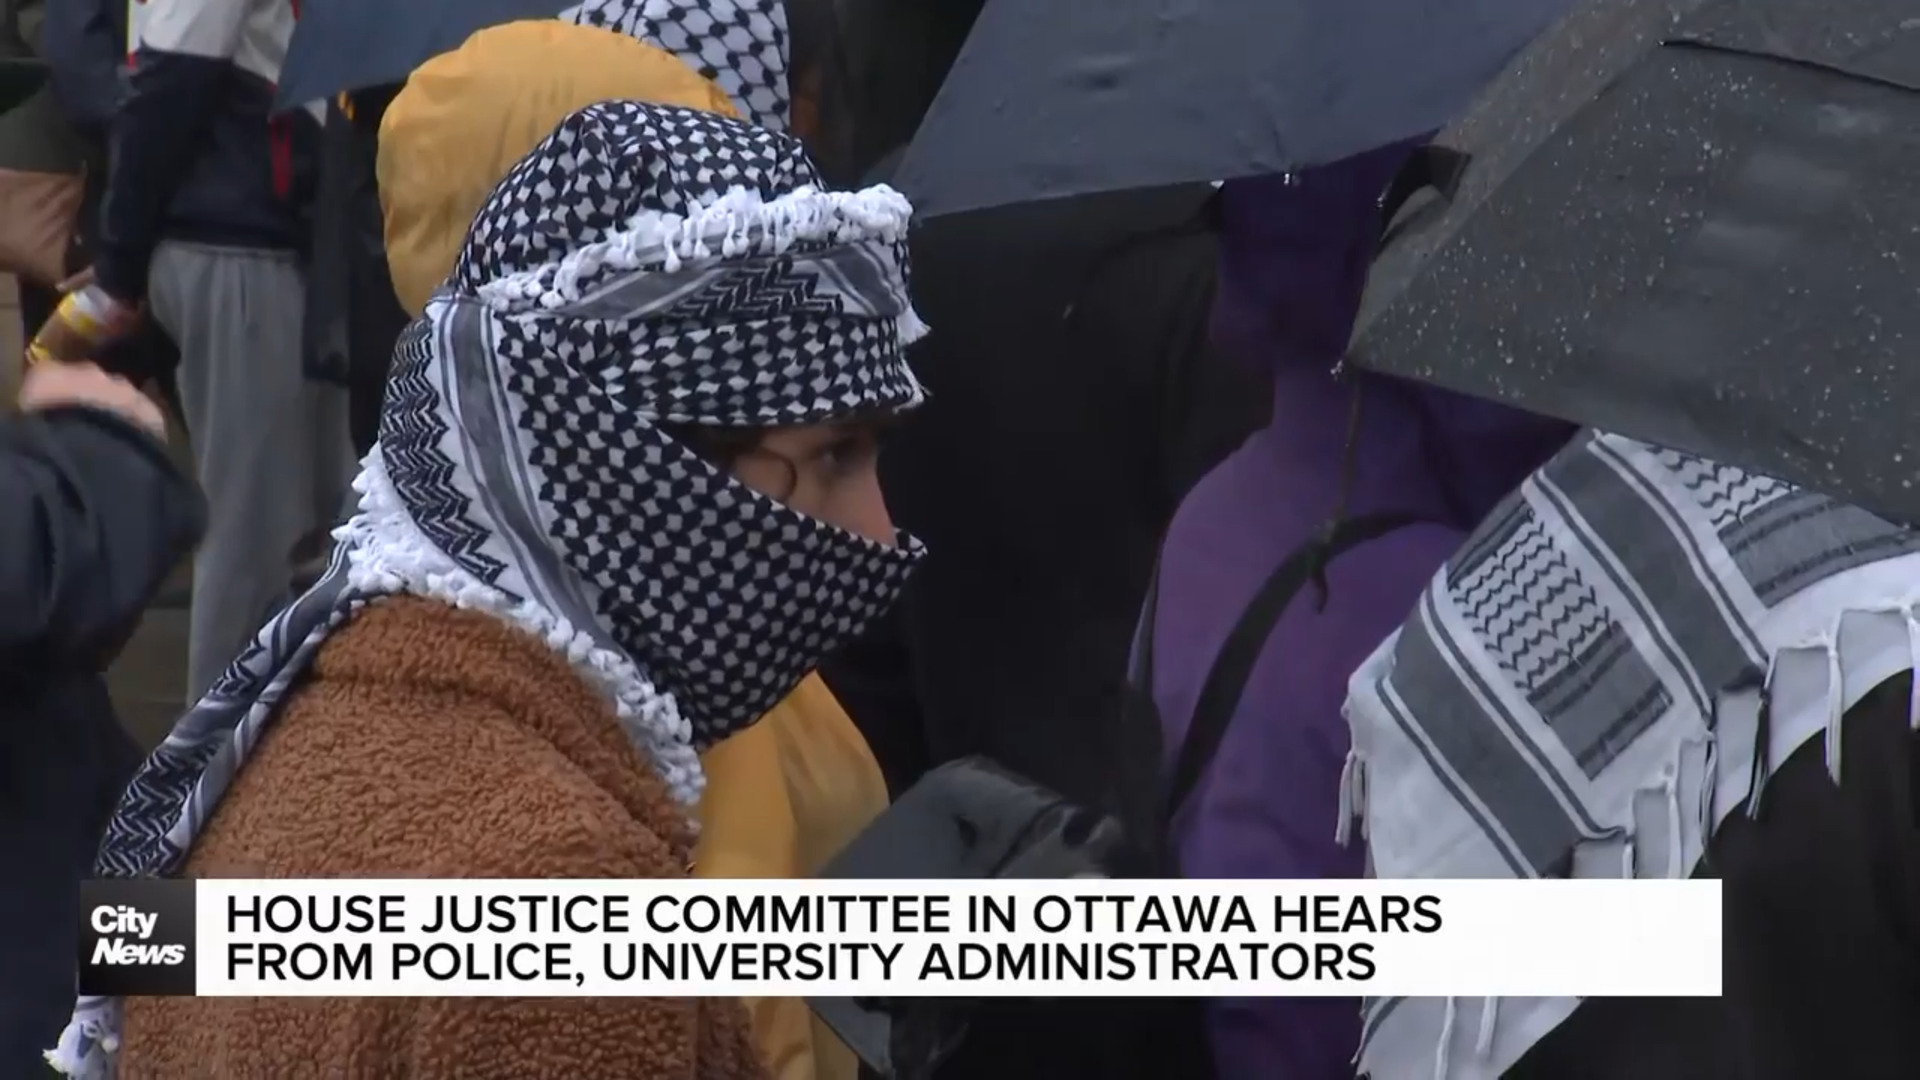 Police, university officials meet with House Justice Committee in Ottawa